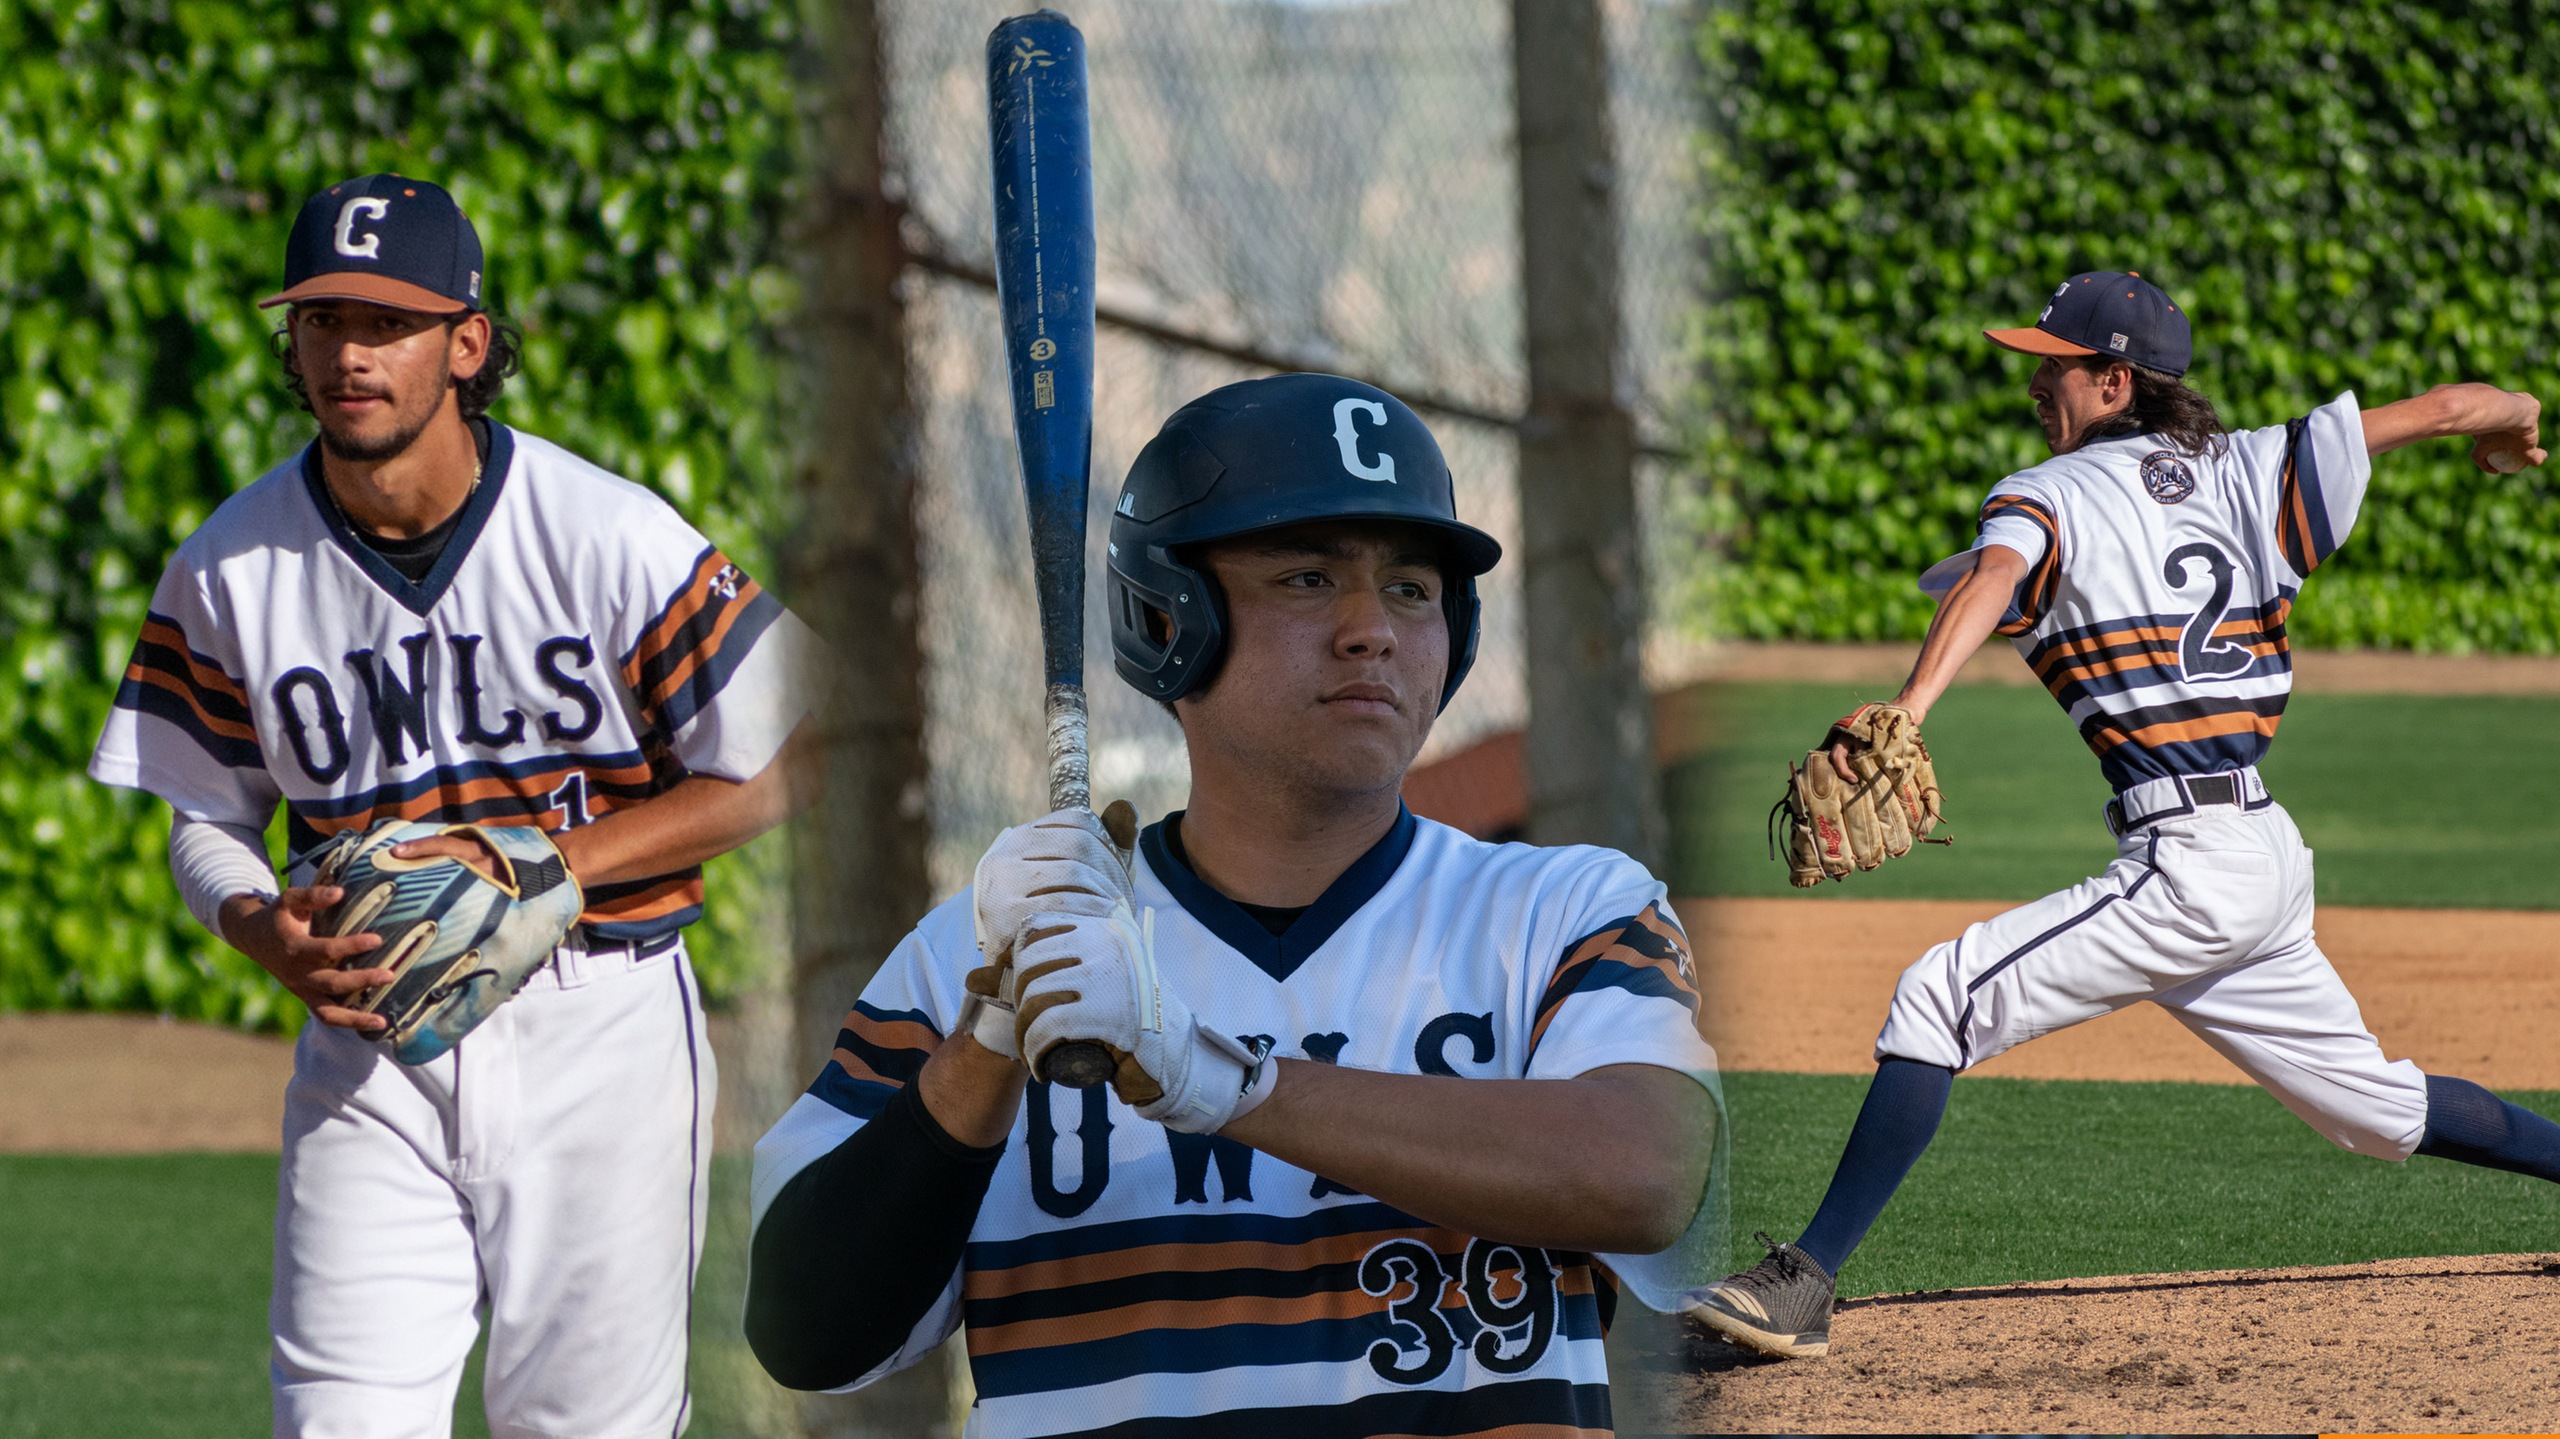 Robert Valdivia, Conner McKinney and Ryan Luiz Harney are set to continue their playing careers after solid seasons with Citrus. Photos by Jacob Bramley